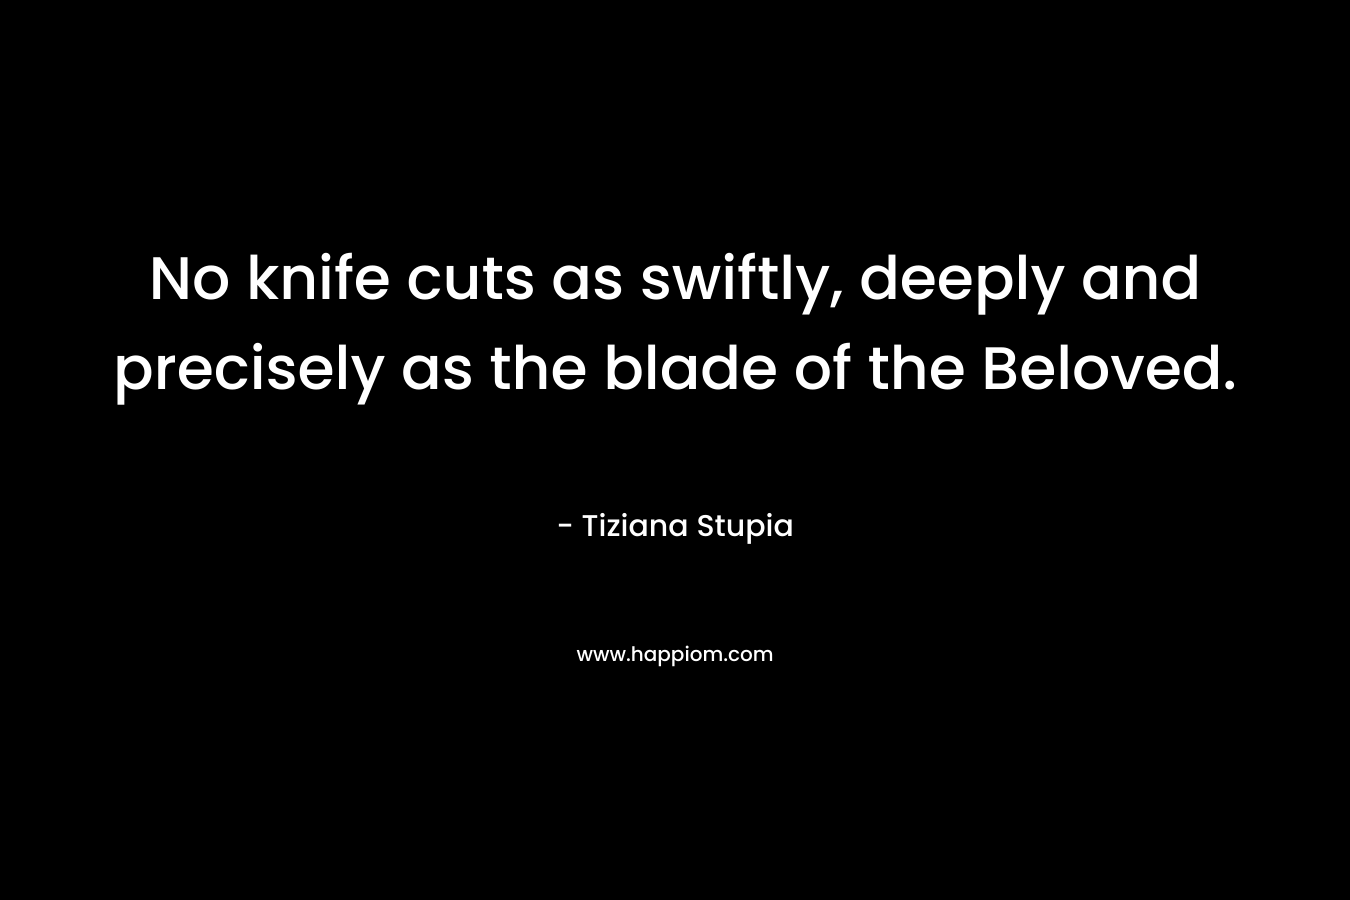 No knife cuts as swiftly, deeply and precisely as the blade of the Beloved.